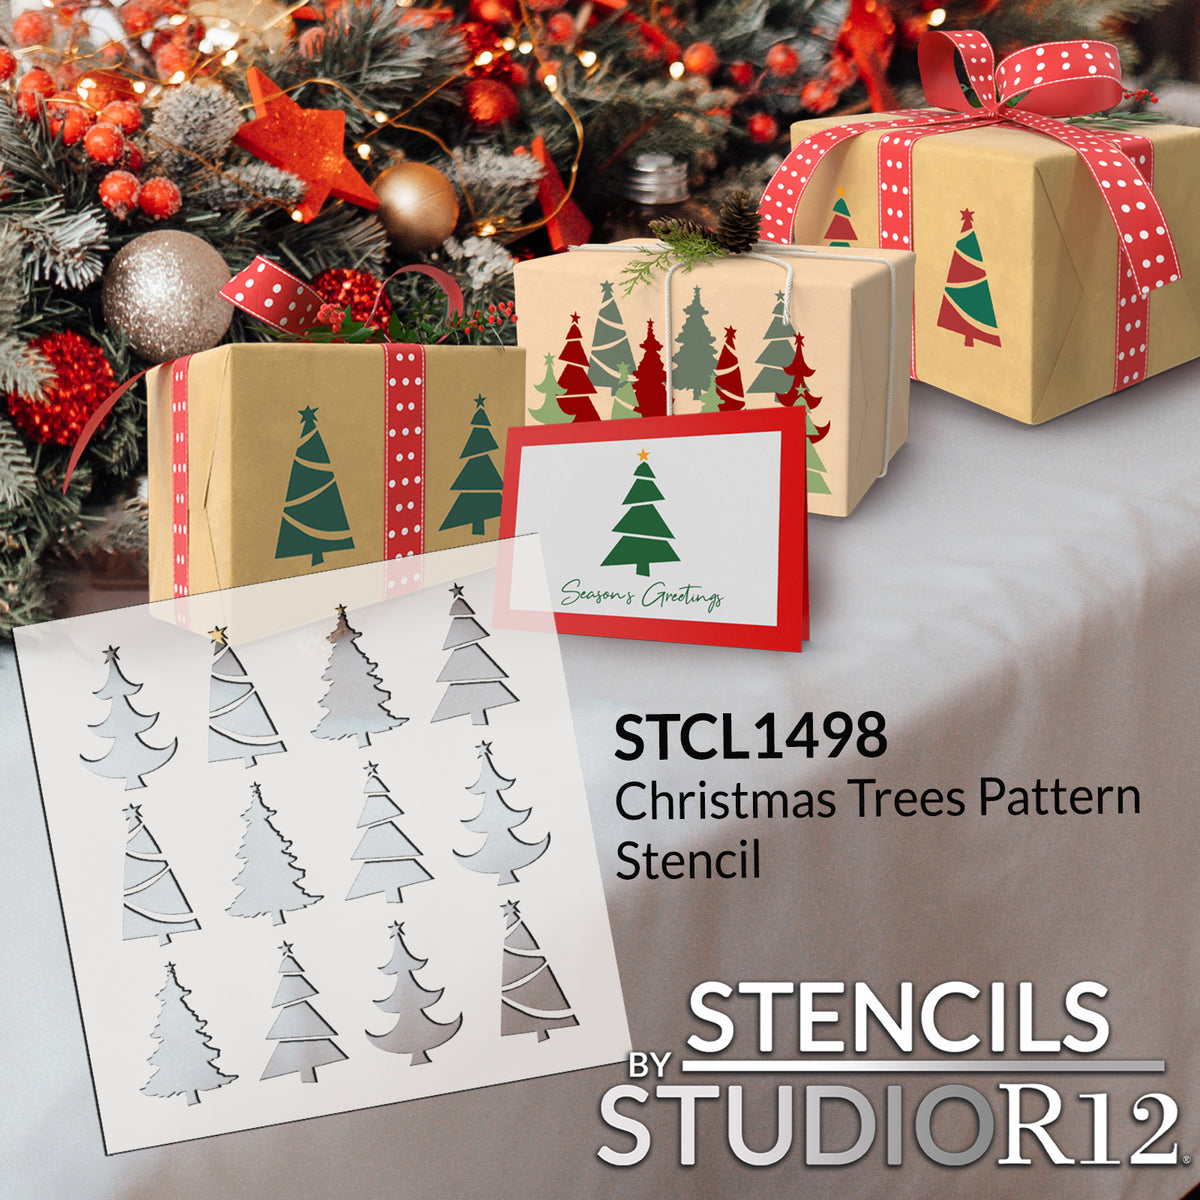 Get Creative with Free Holiday Stencils and Templates for a 3D Pen